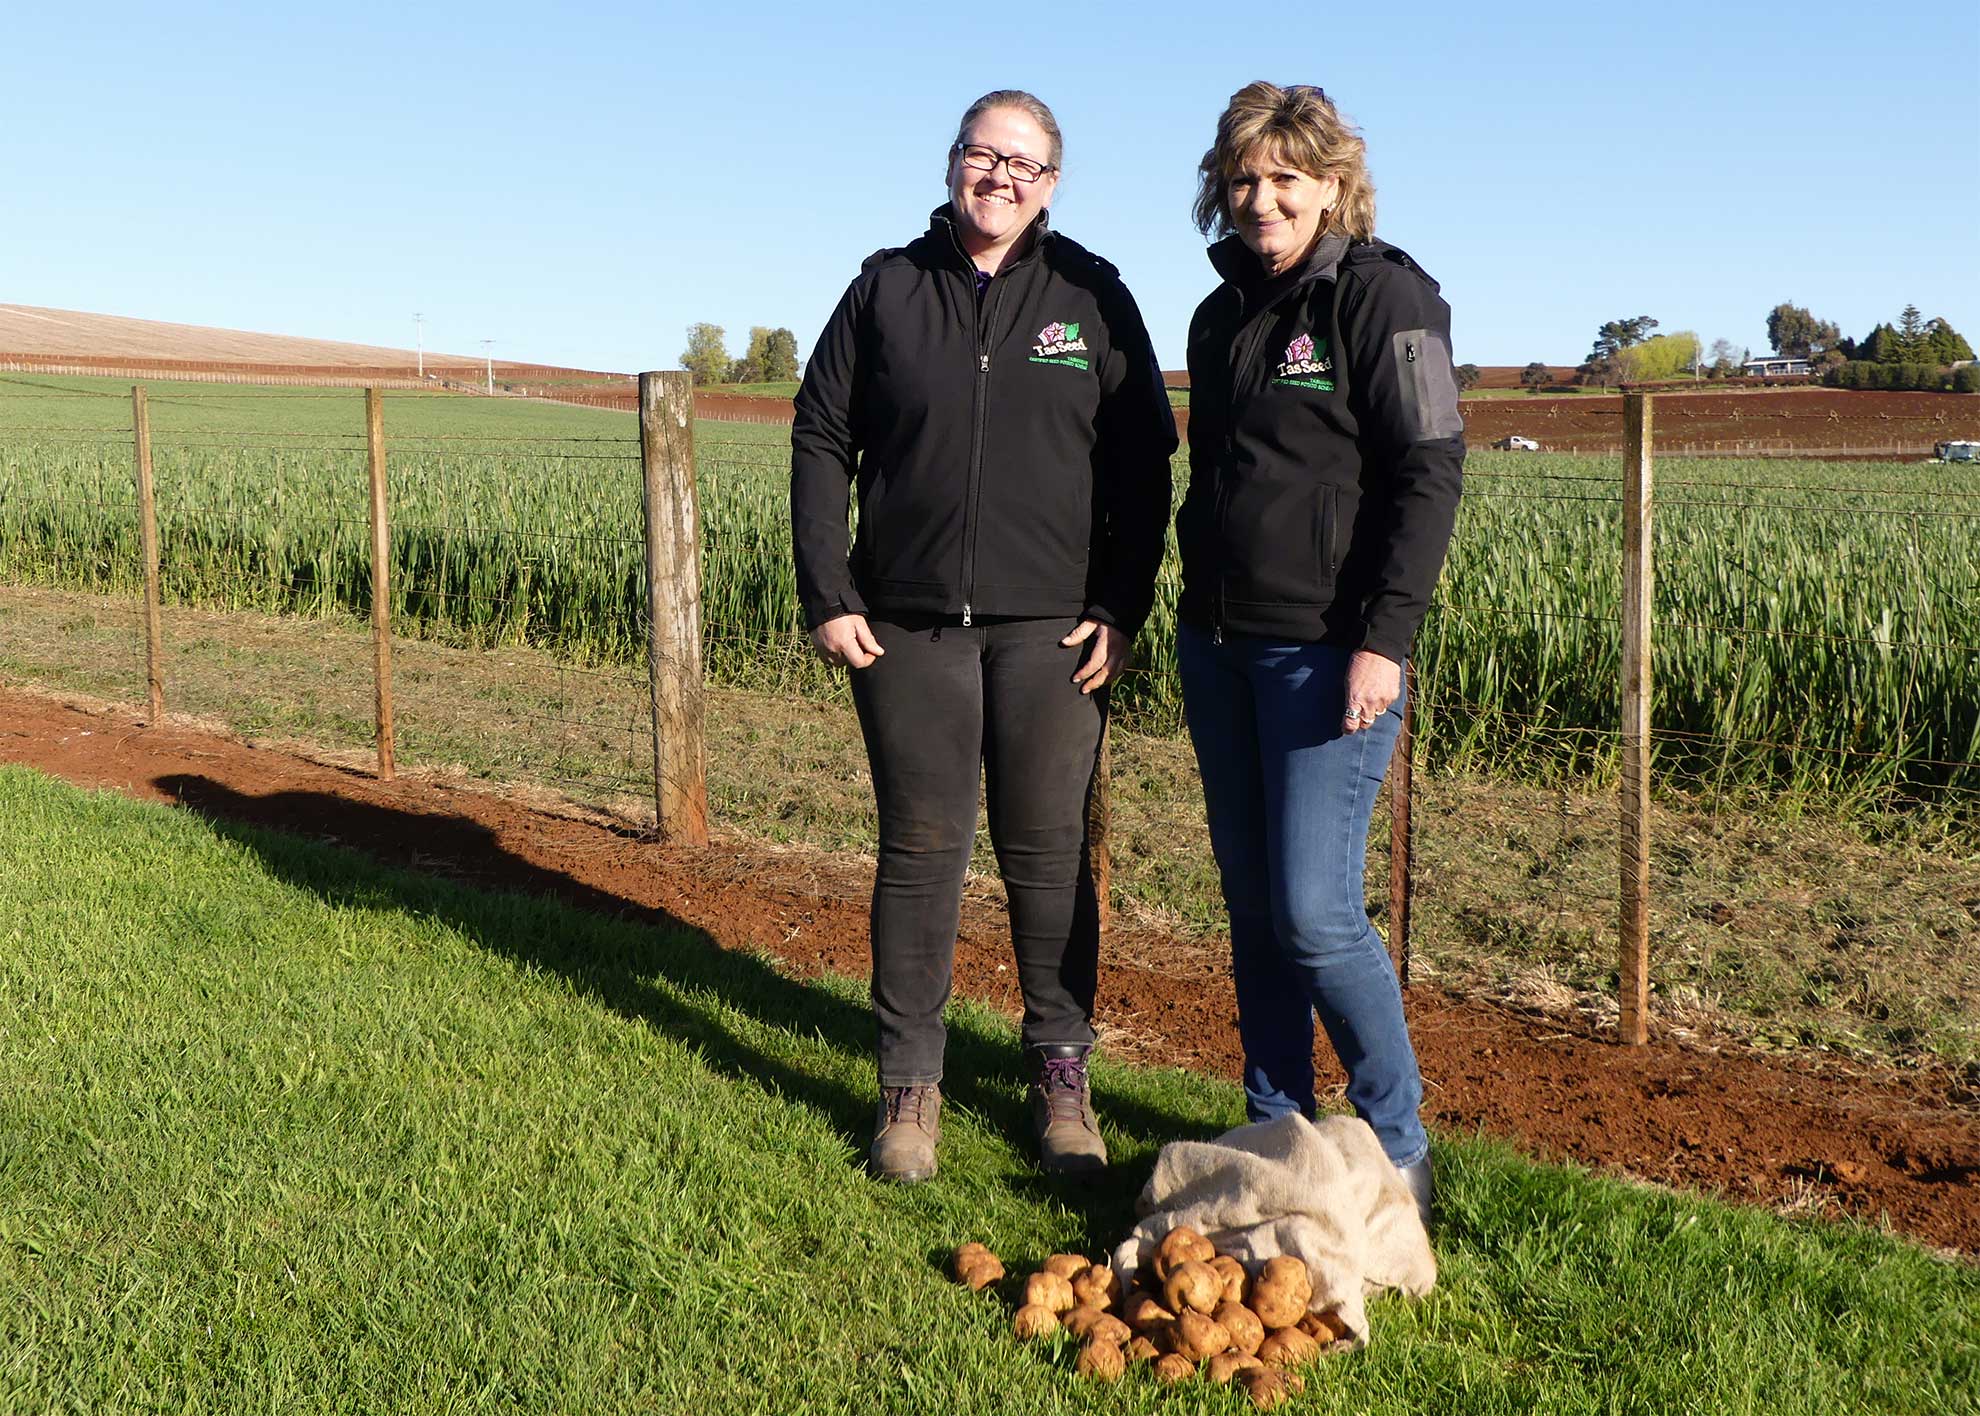 Tasmanian Certified Seed Potato Scheme Certification Officers, Kathryn Goulding and Ann-Maree Donoghue, standing with a bag of potatoes.